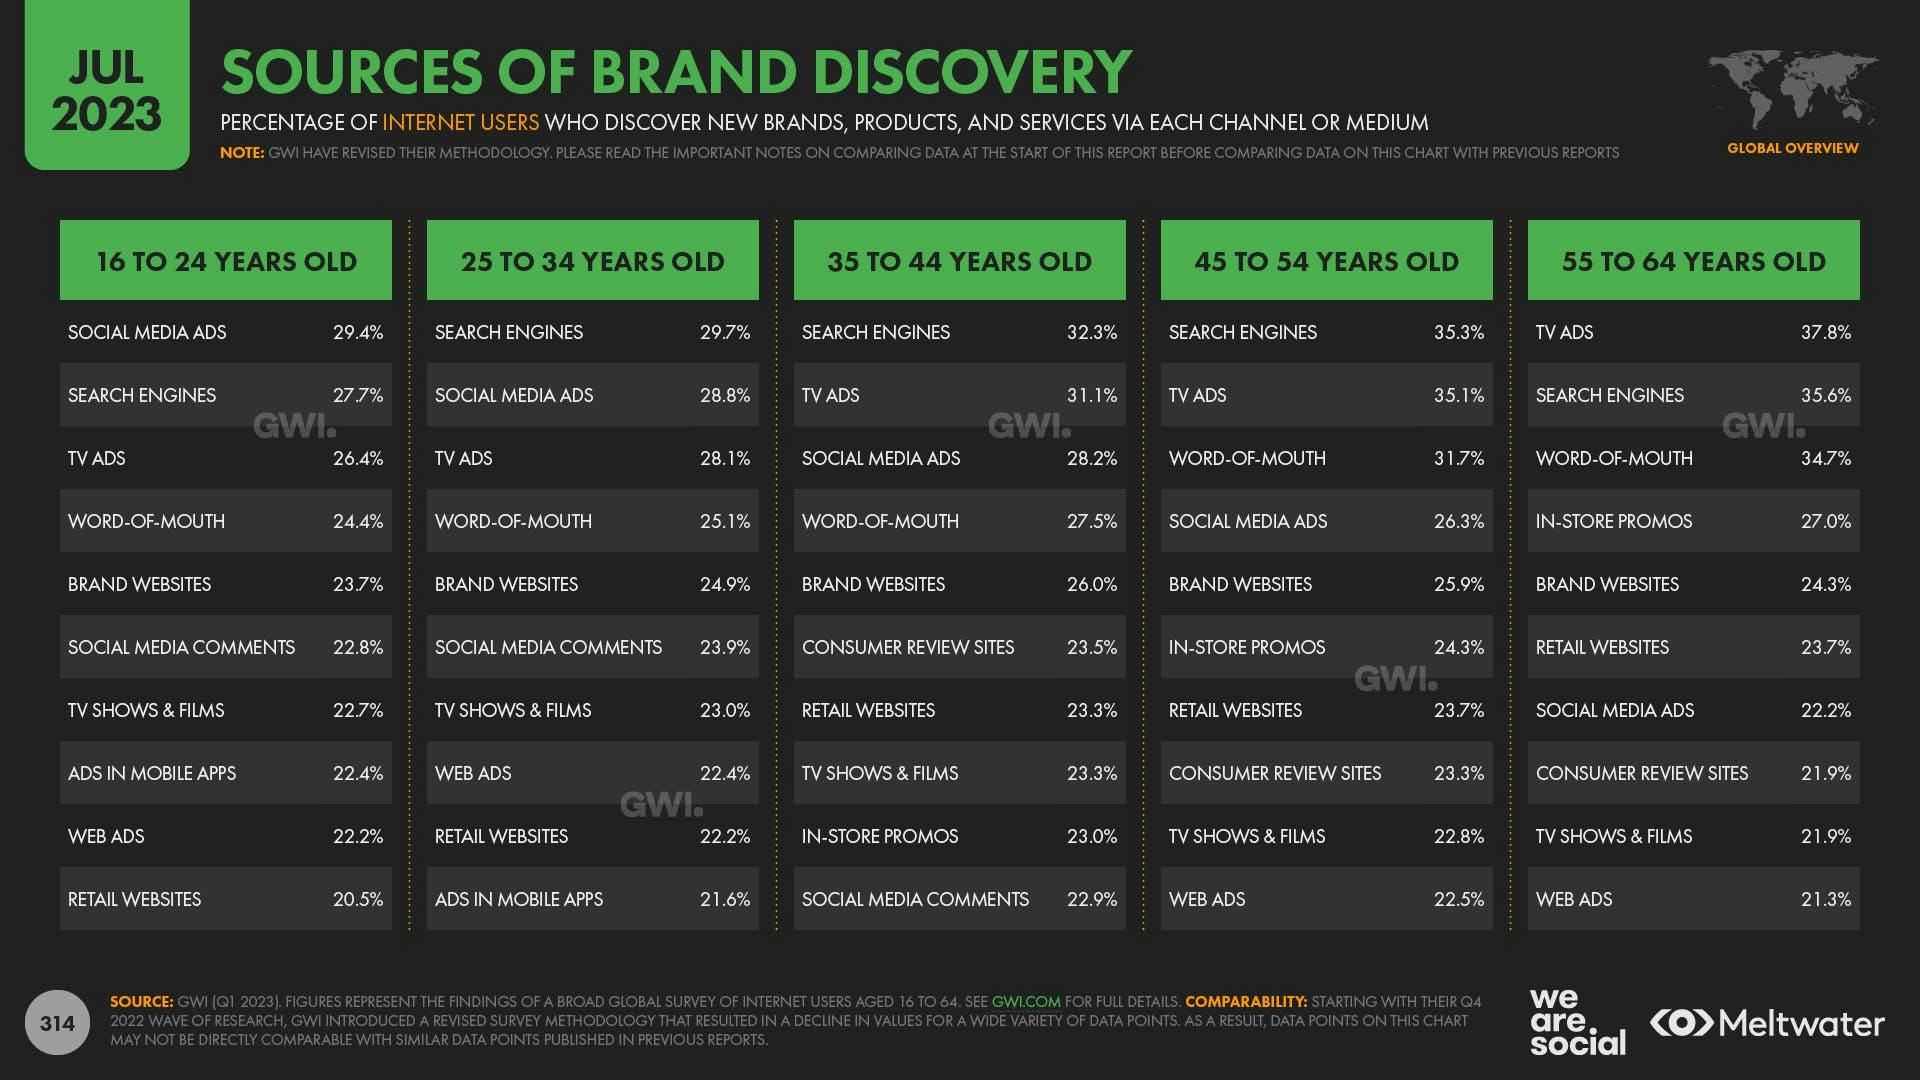 Sources of brand discovery by age